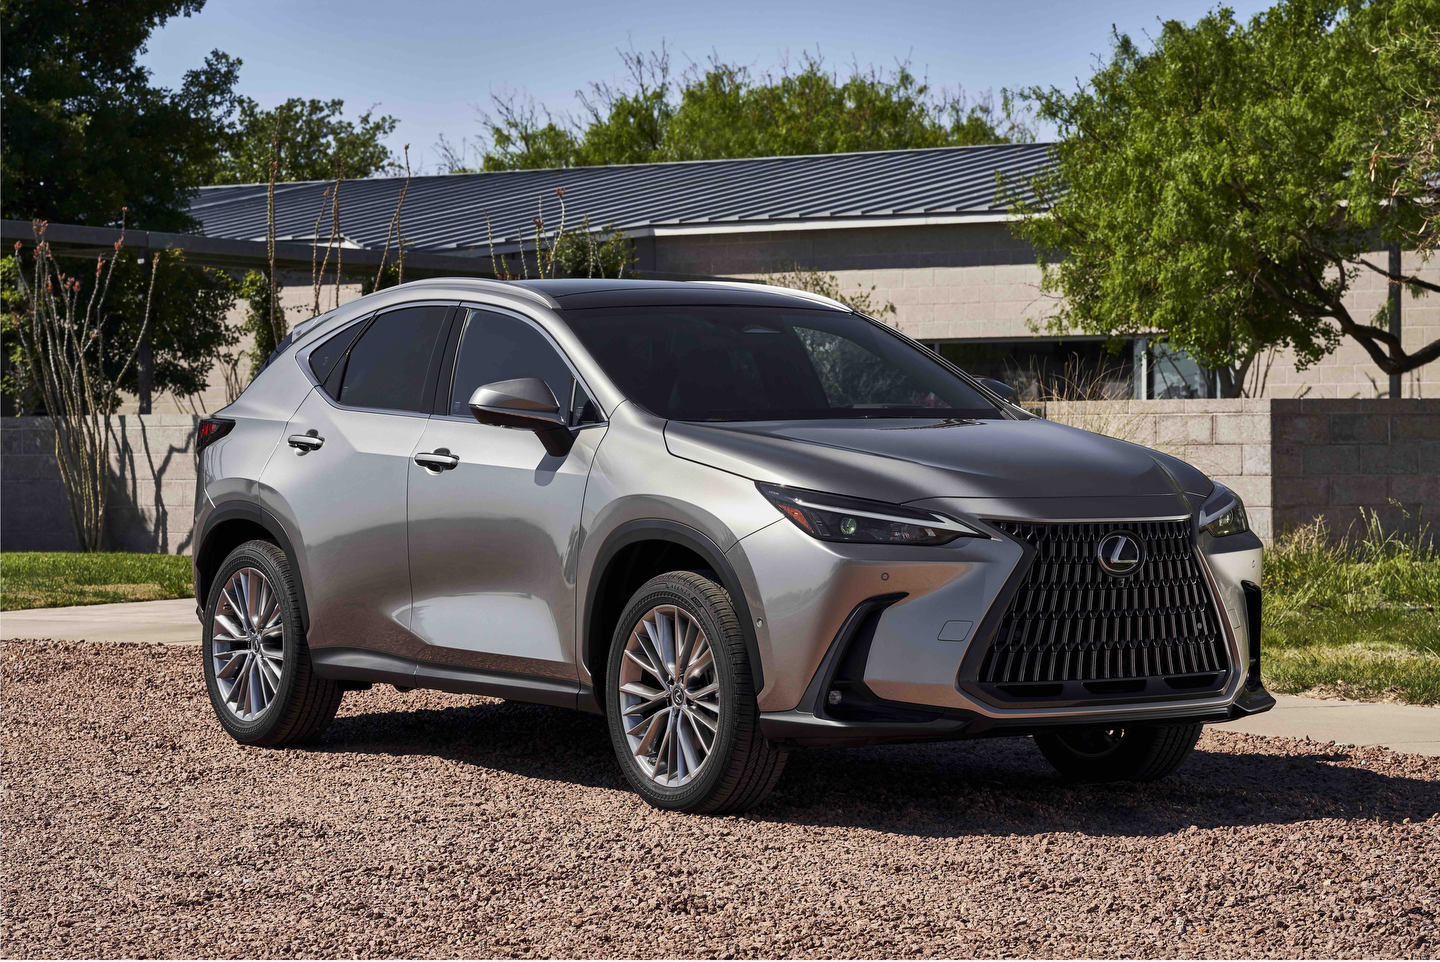 What are the differences between the 2022 Lexus NX 350h and the 2022 Lexus RX 450h